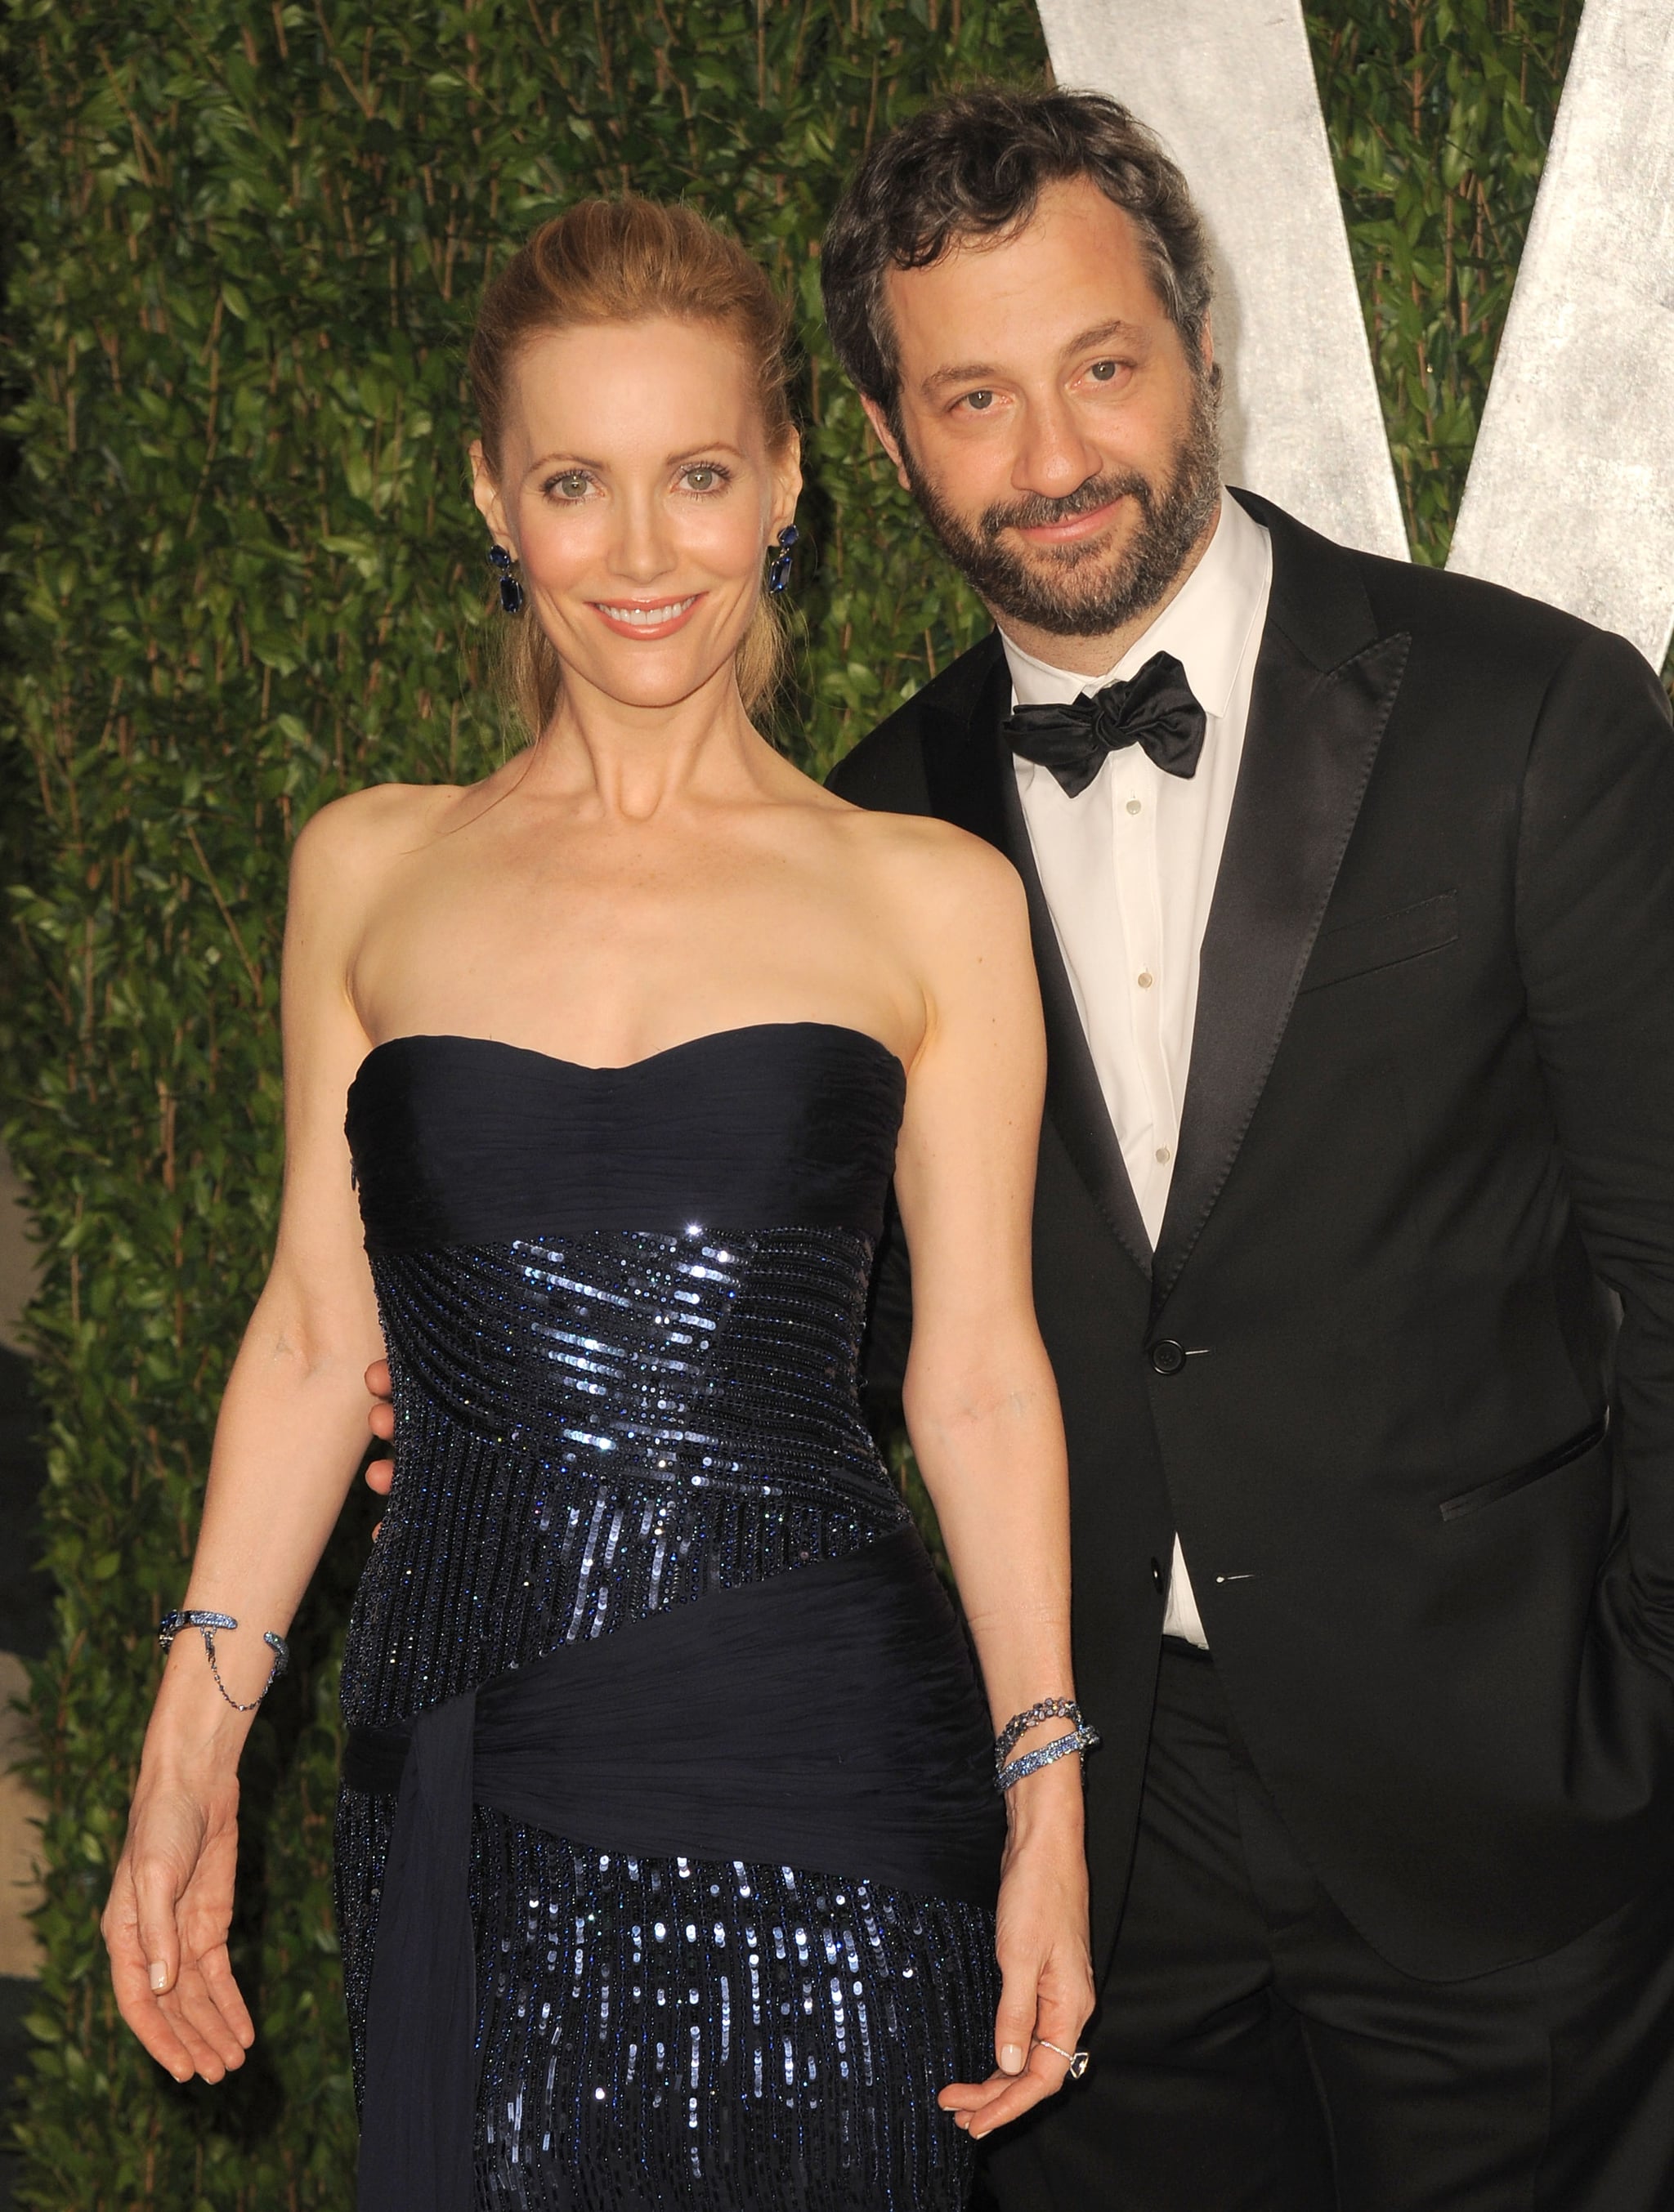 Judd Apatow and his wife Leslie Mann at the Vanity Fair carpet.